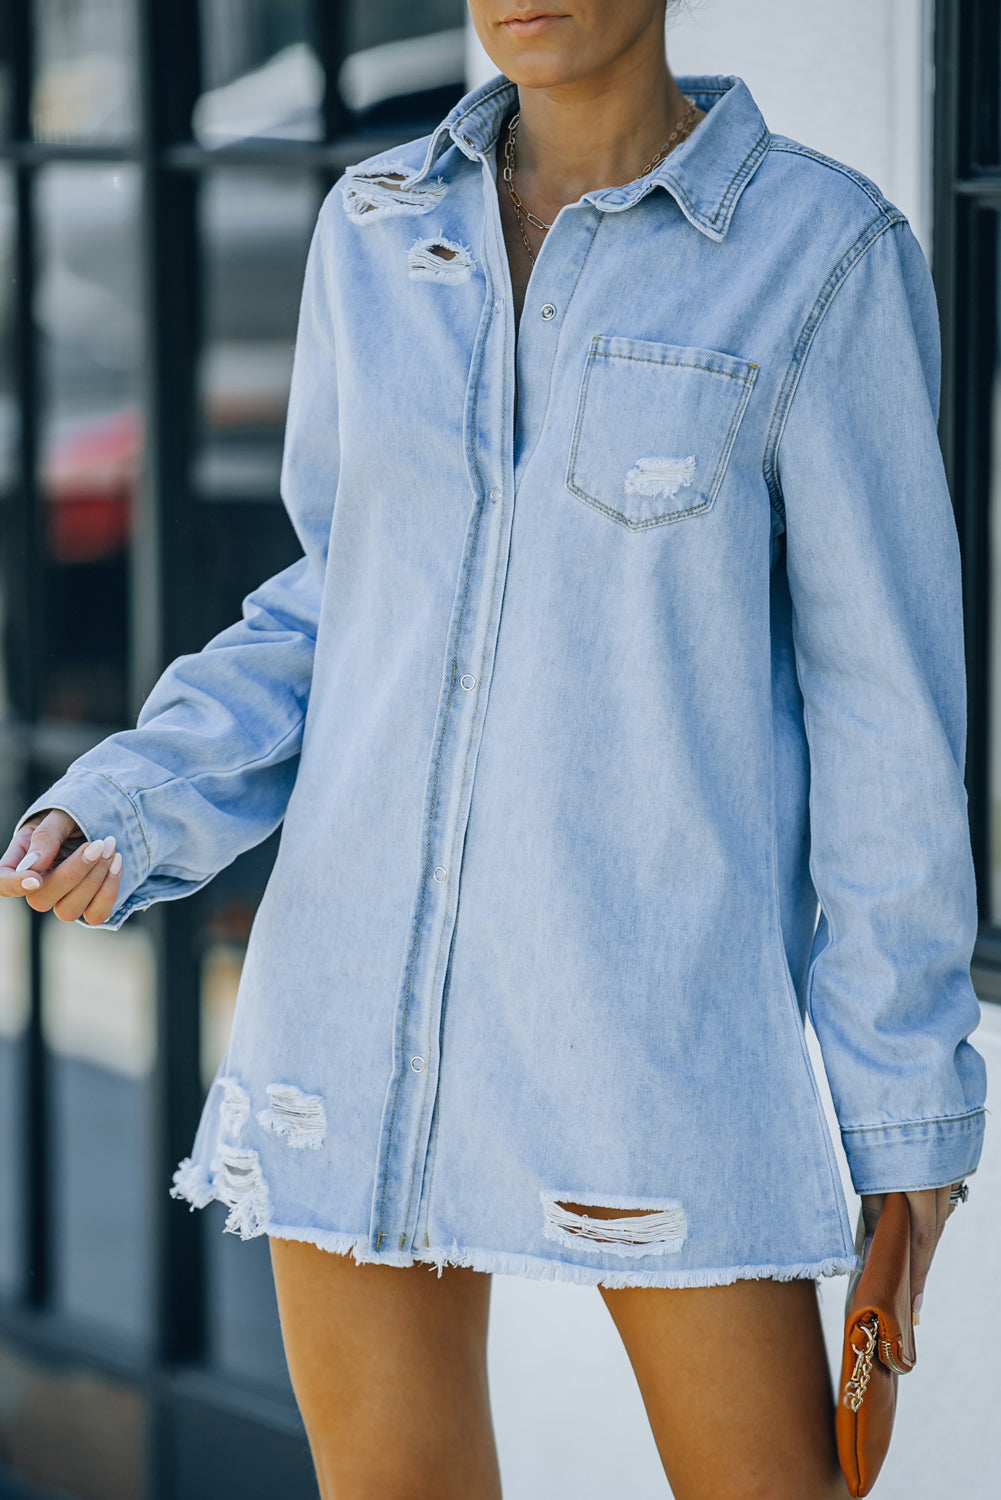 Chic Distressed Snap-Down Denim Jacket for Effortless Style